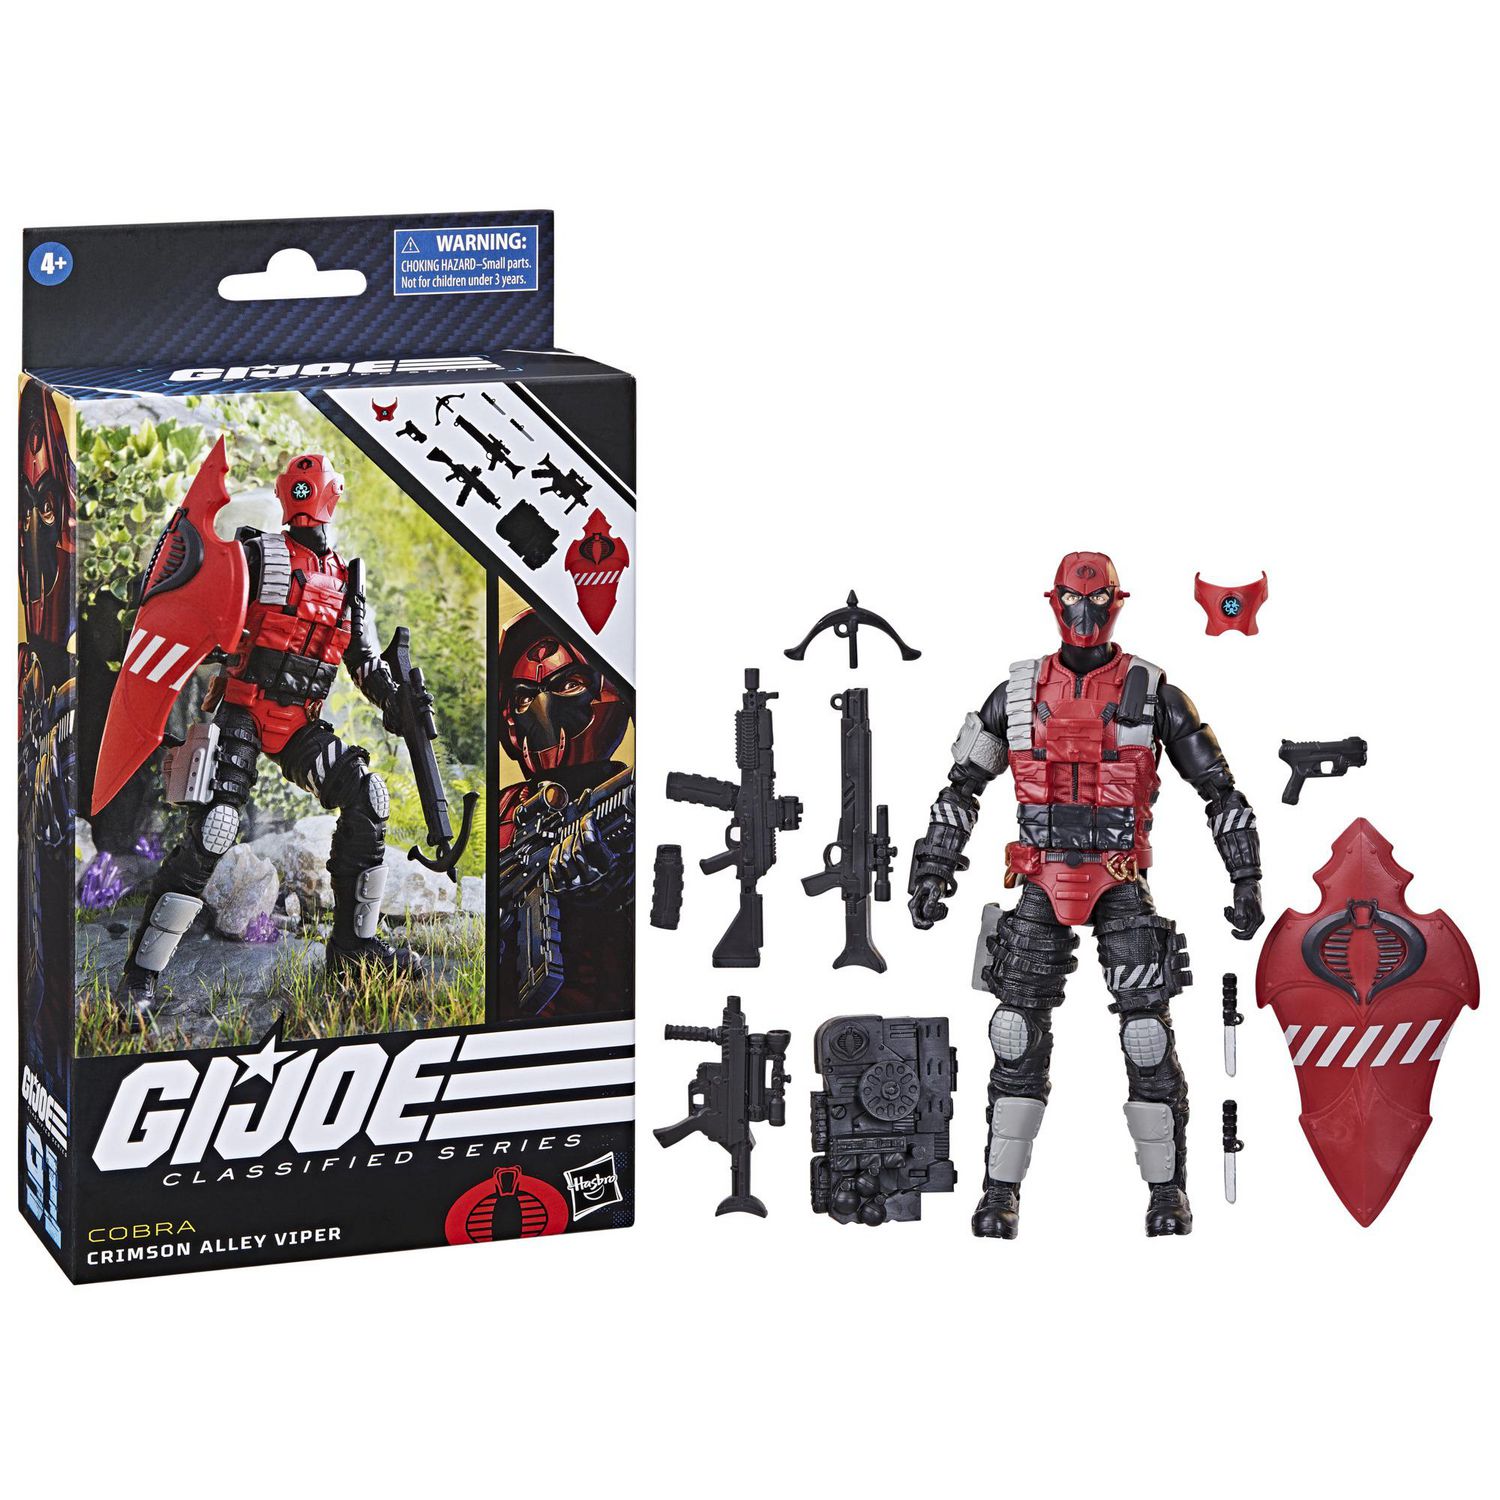 G.I. Joe Classified Series Crimson Alley Viper, Collectible G.I. Joe Action  Figure, 91, 6 inch Action Figures For Boys & Girls, With 10 Accessories